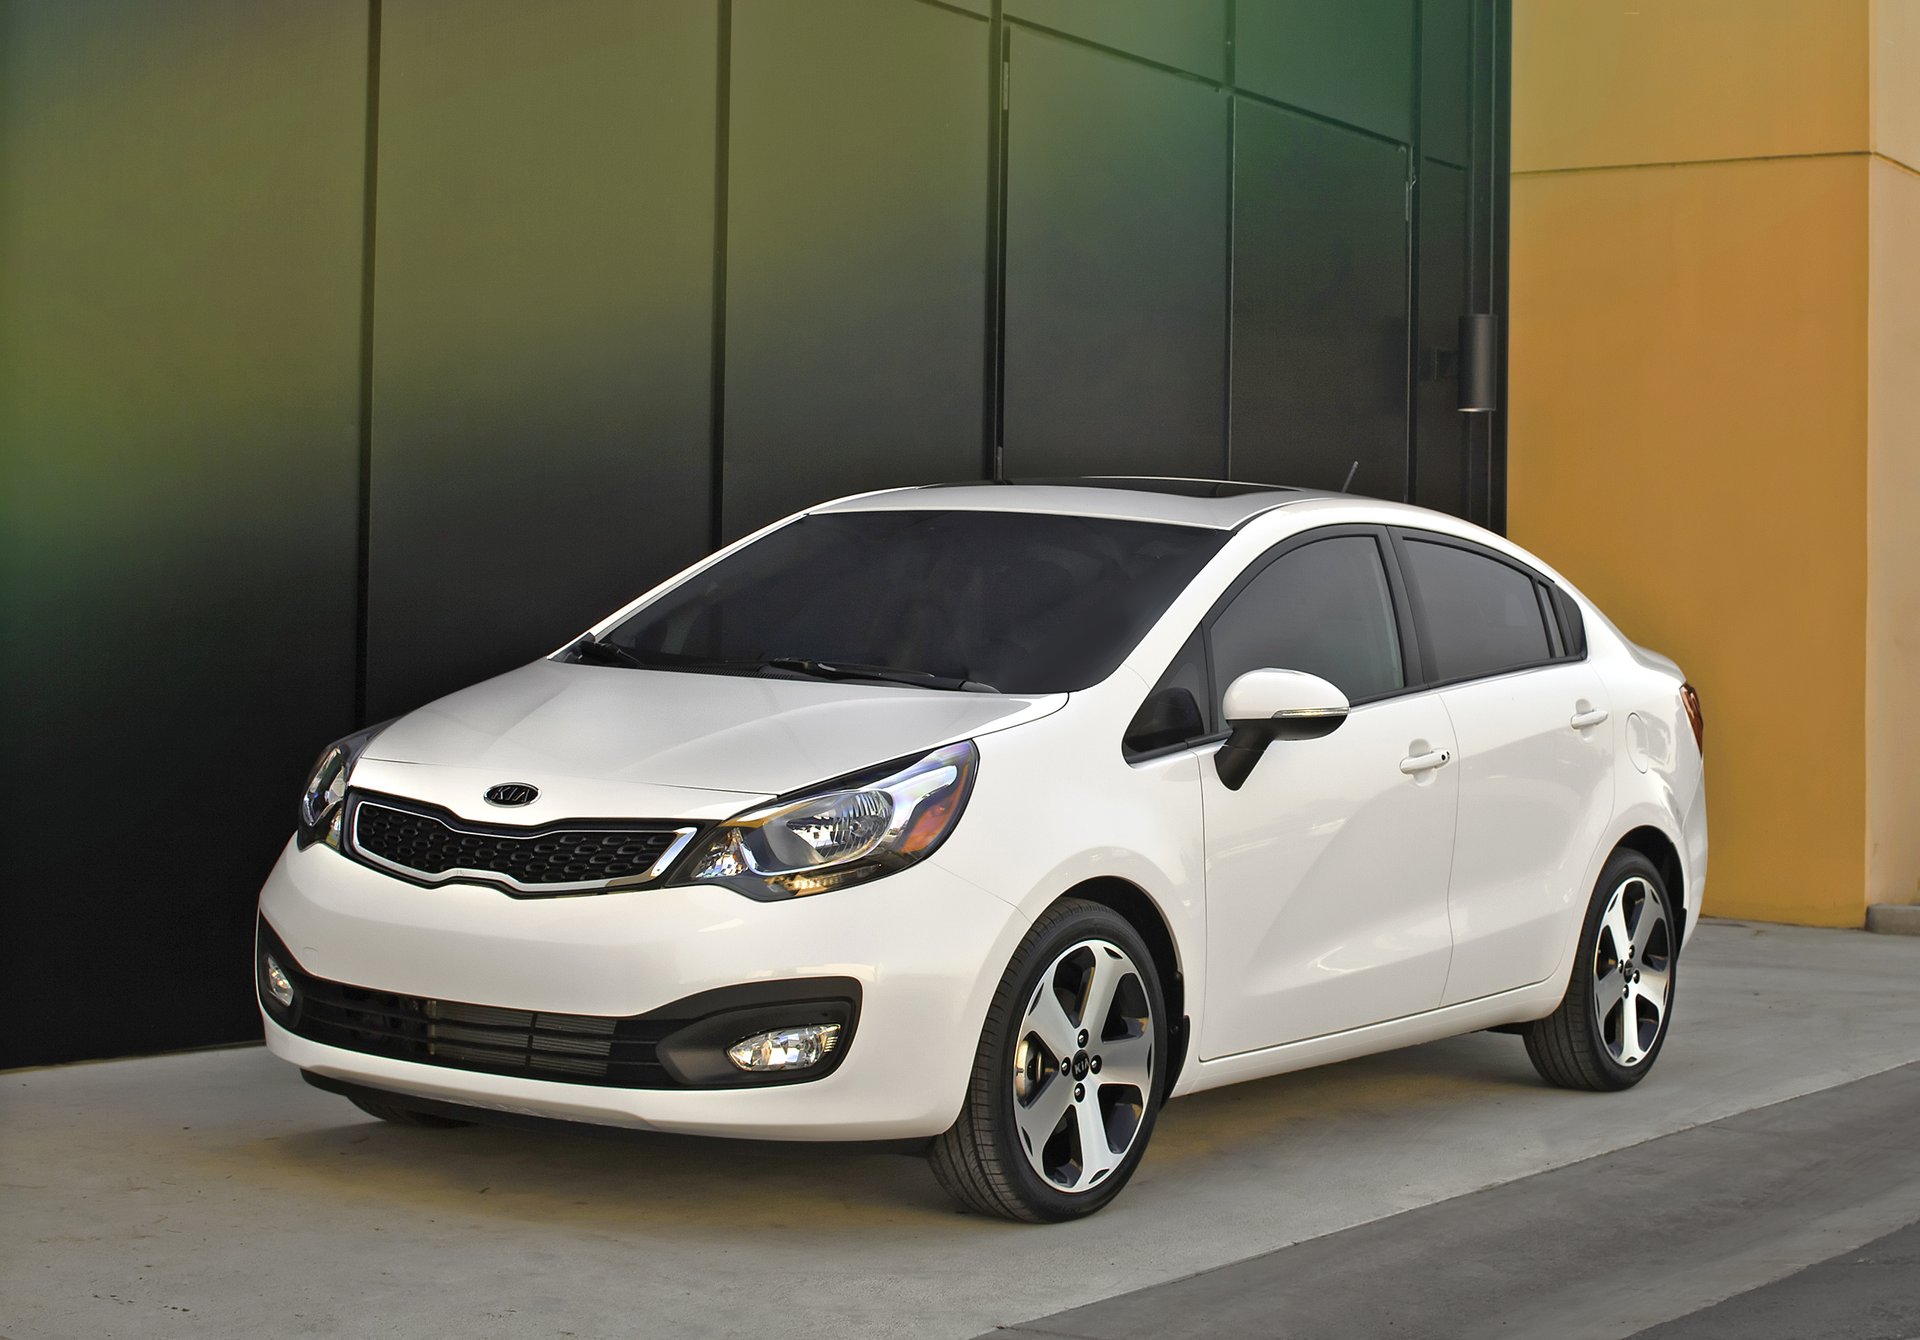 2015 Kia Rio Review, Ratings, Specs, Prices, and Photos - The Car Connection